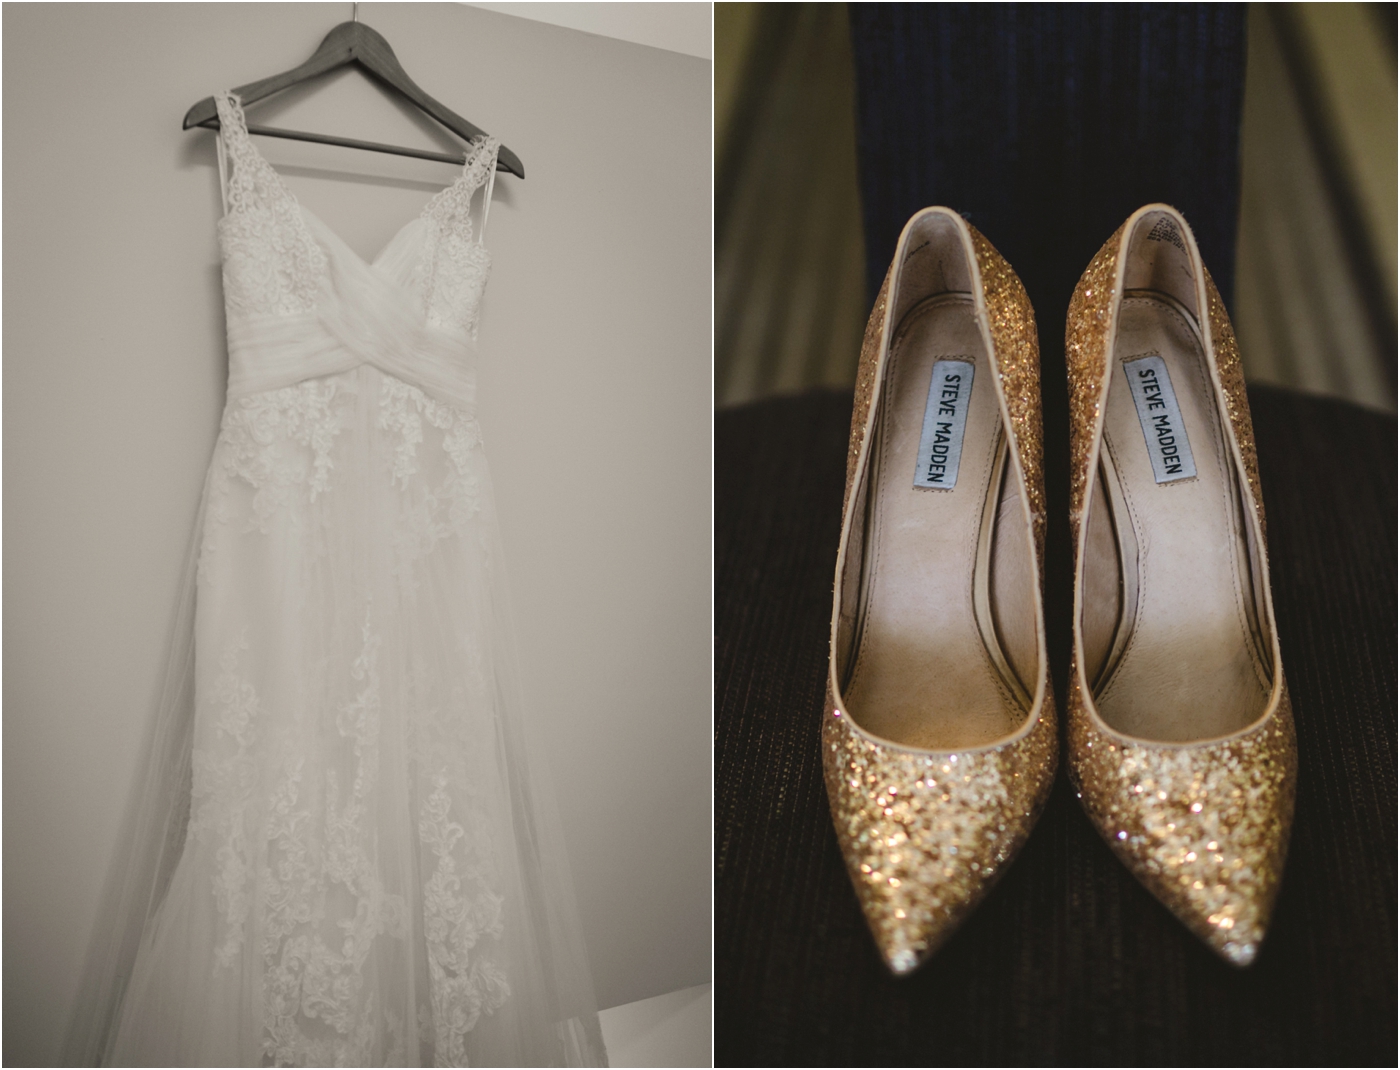 sparkly steve madden heels and lace wedding gown